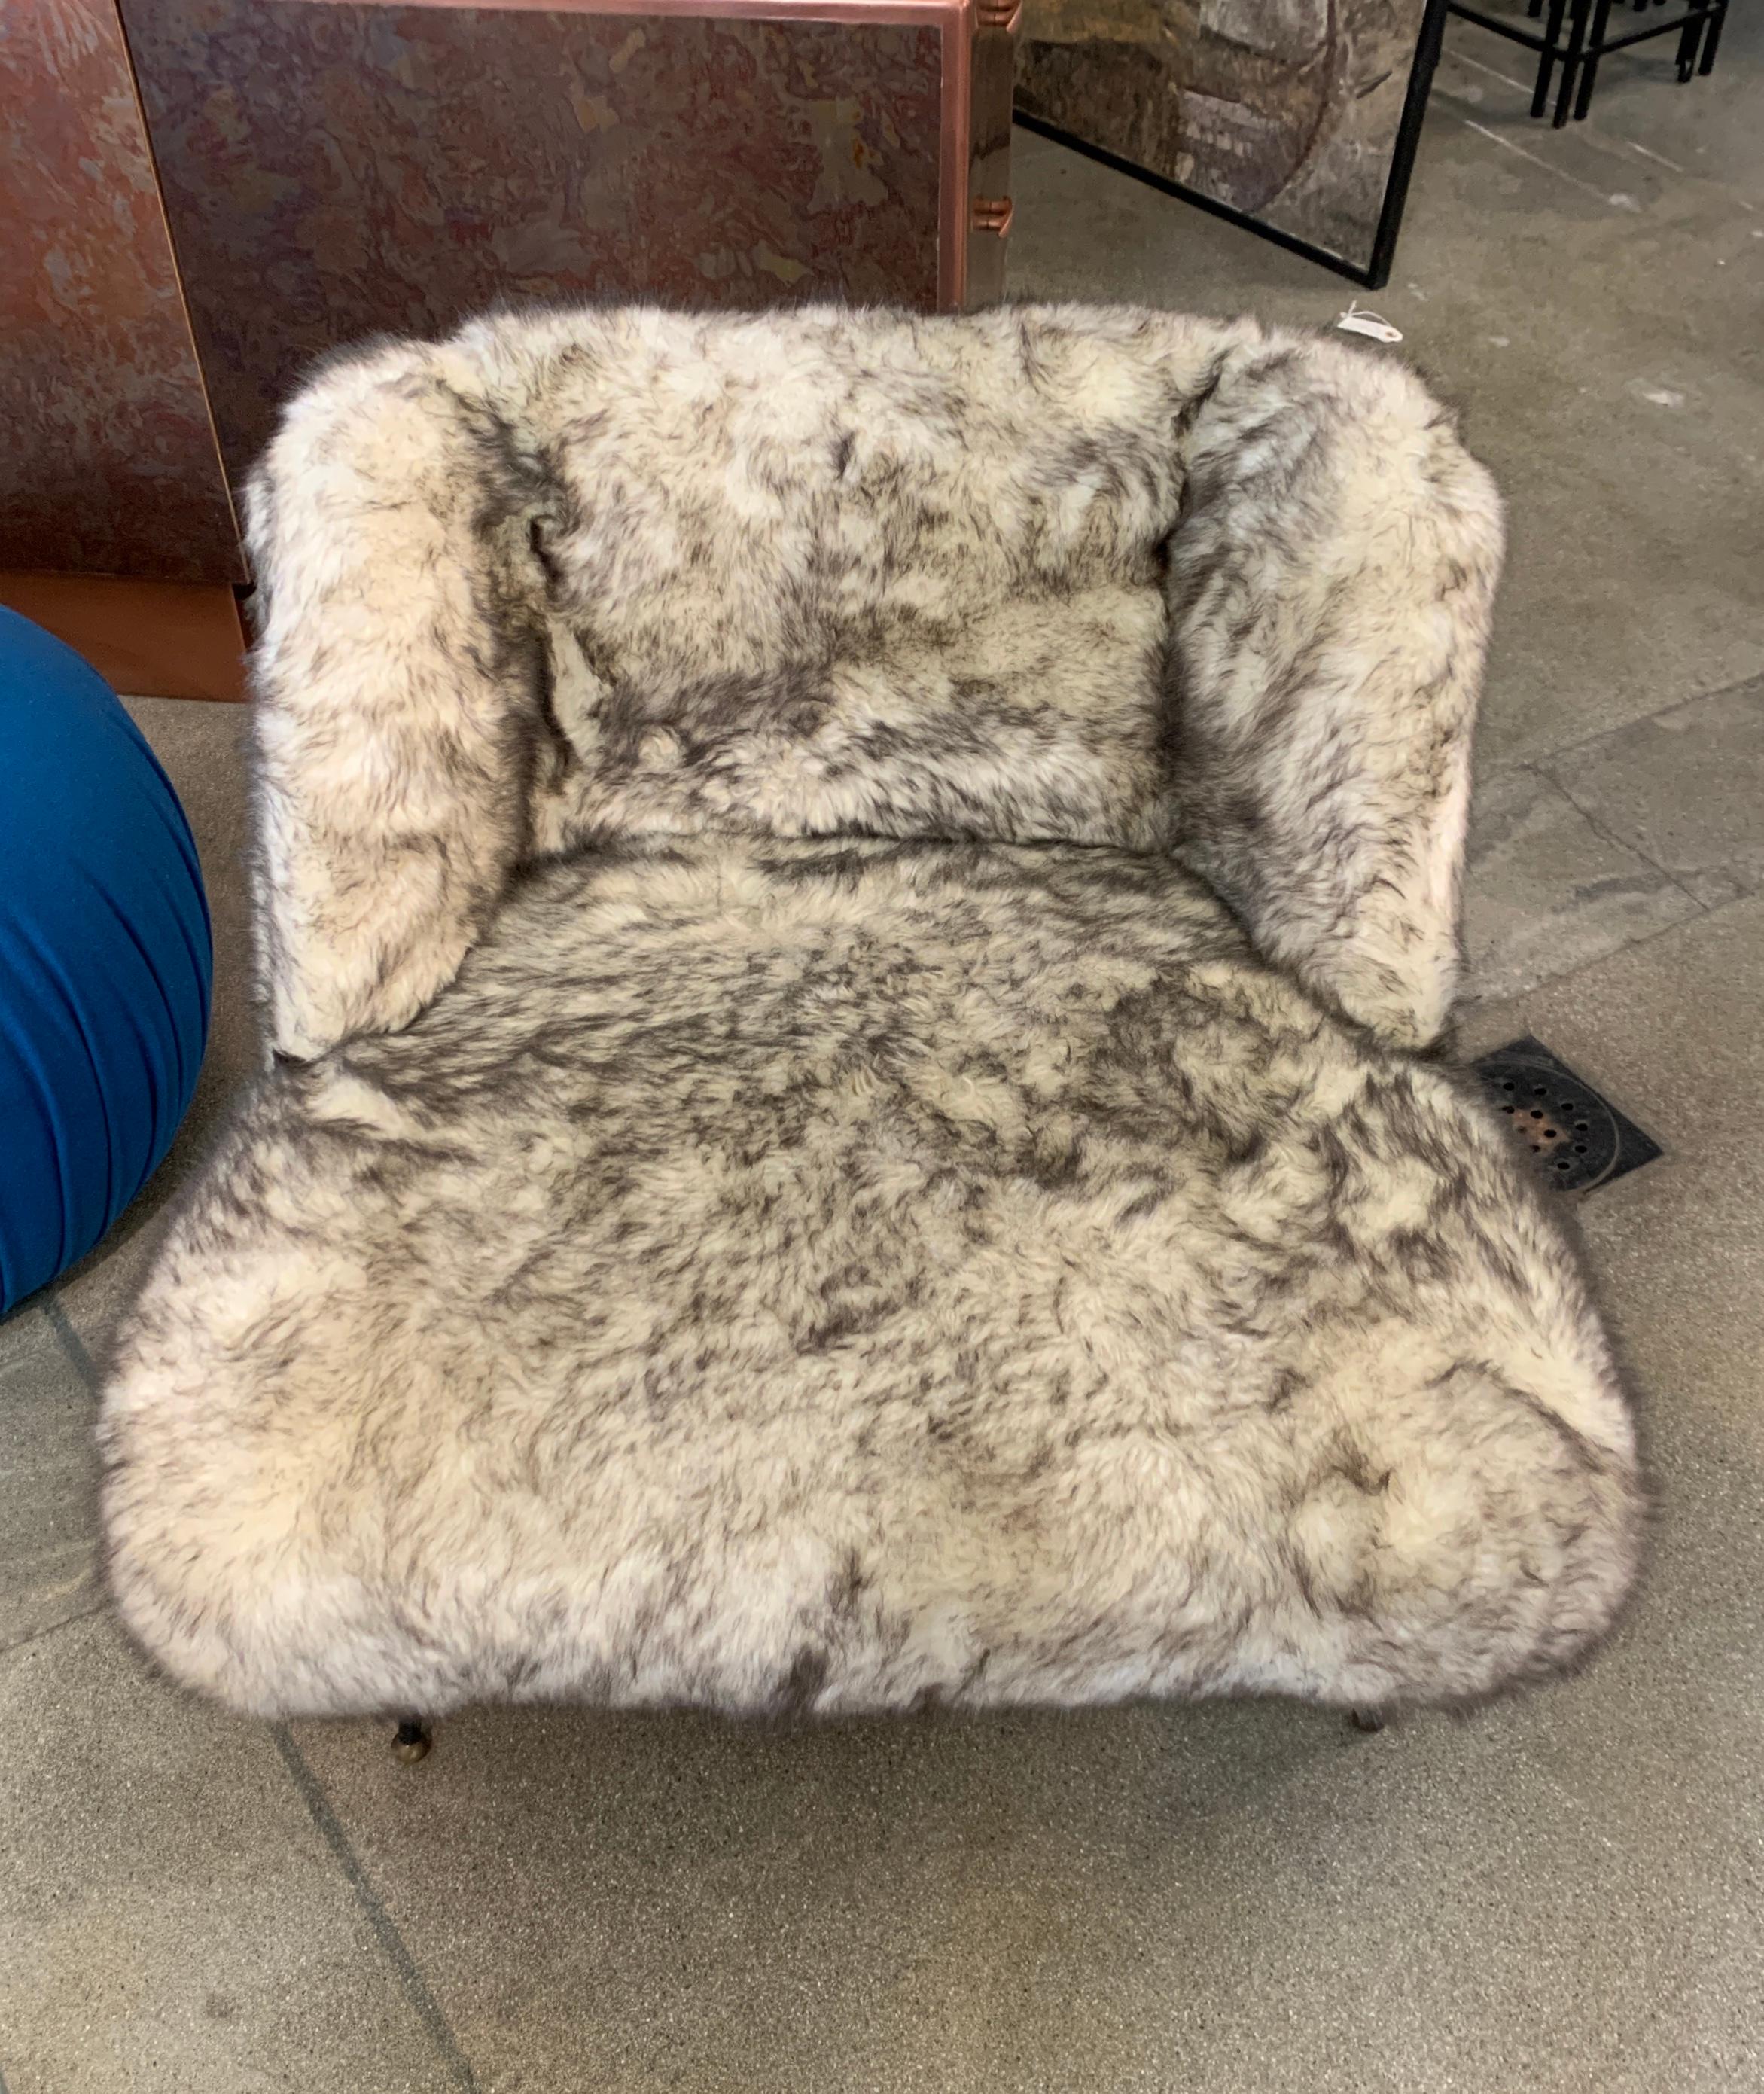 An iron base Faux Fur upholstered chair. It is likely French or European with a hand welded base. Reminiscent of designs by Mathiue mategot and Jean royere. Some of the screw heads are flat and appear older. The feet are brass and round. The chair